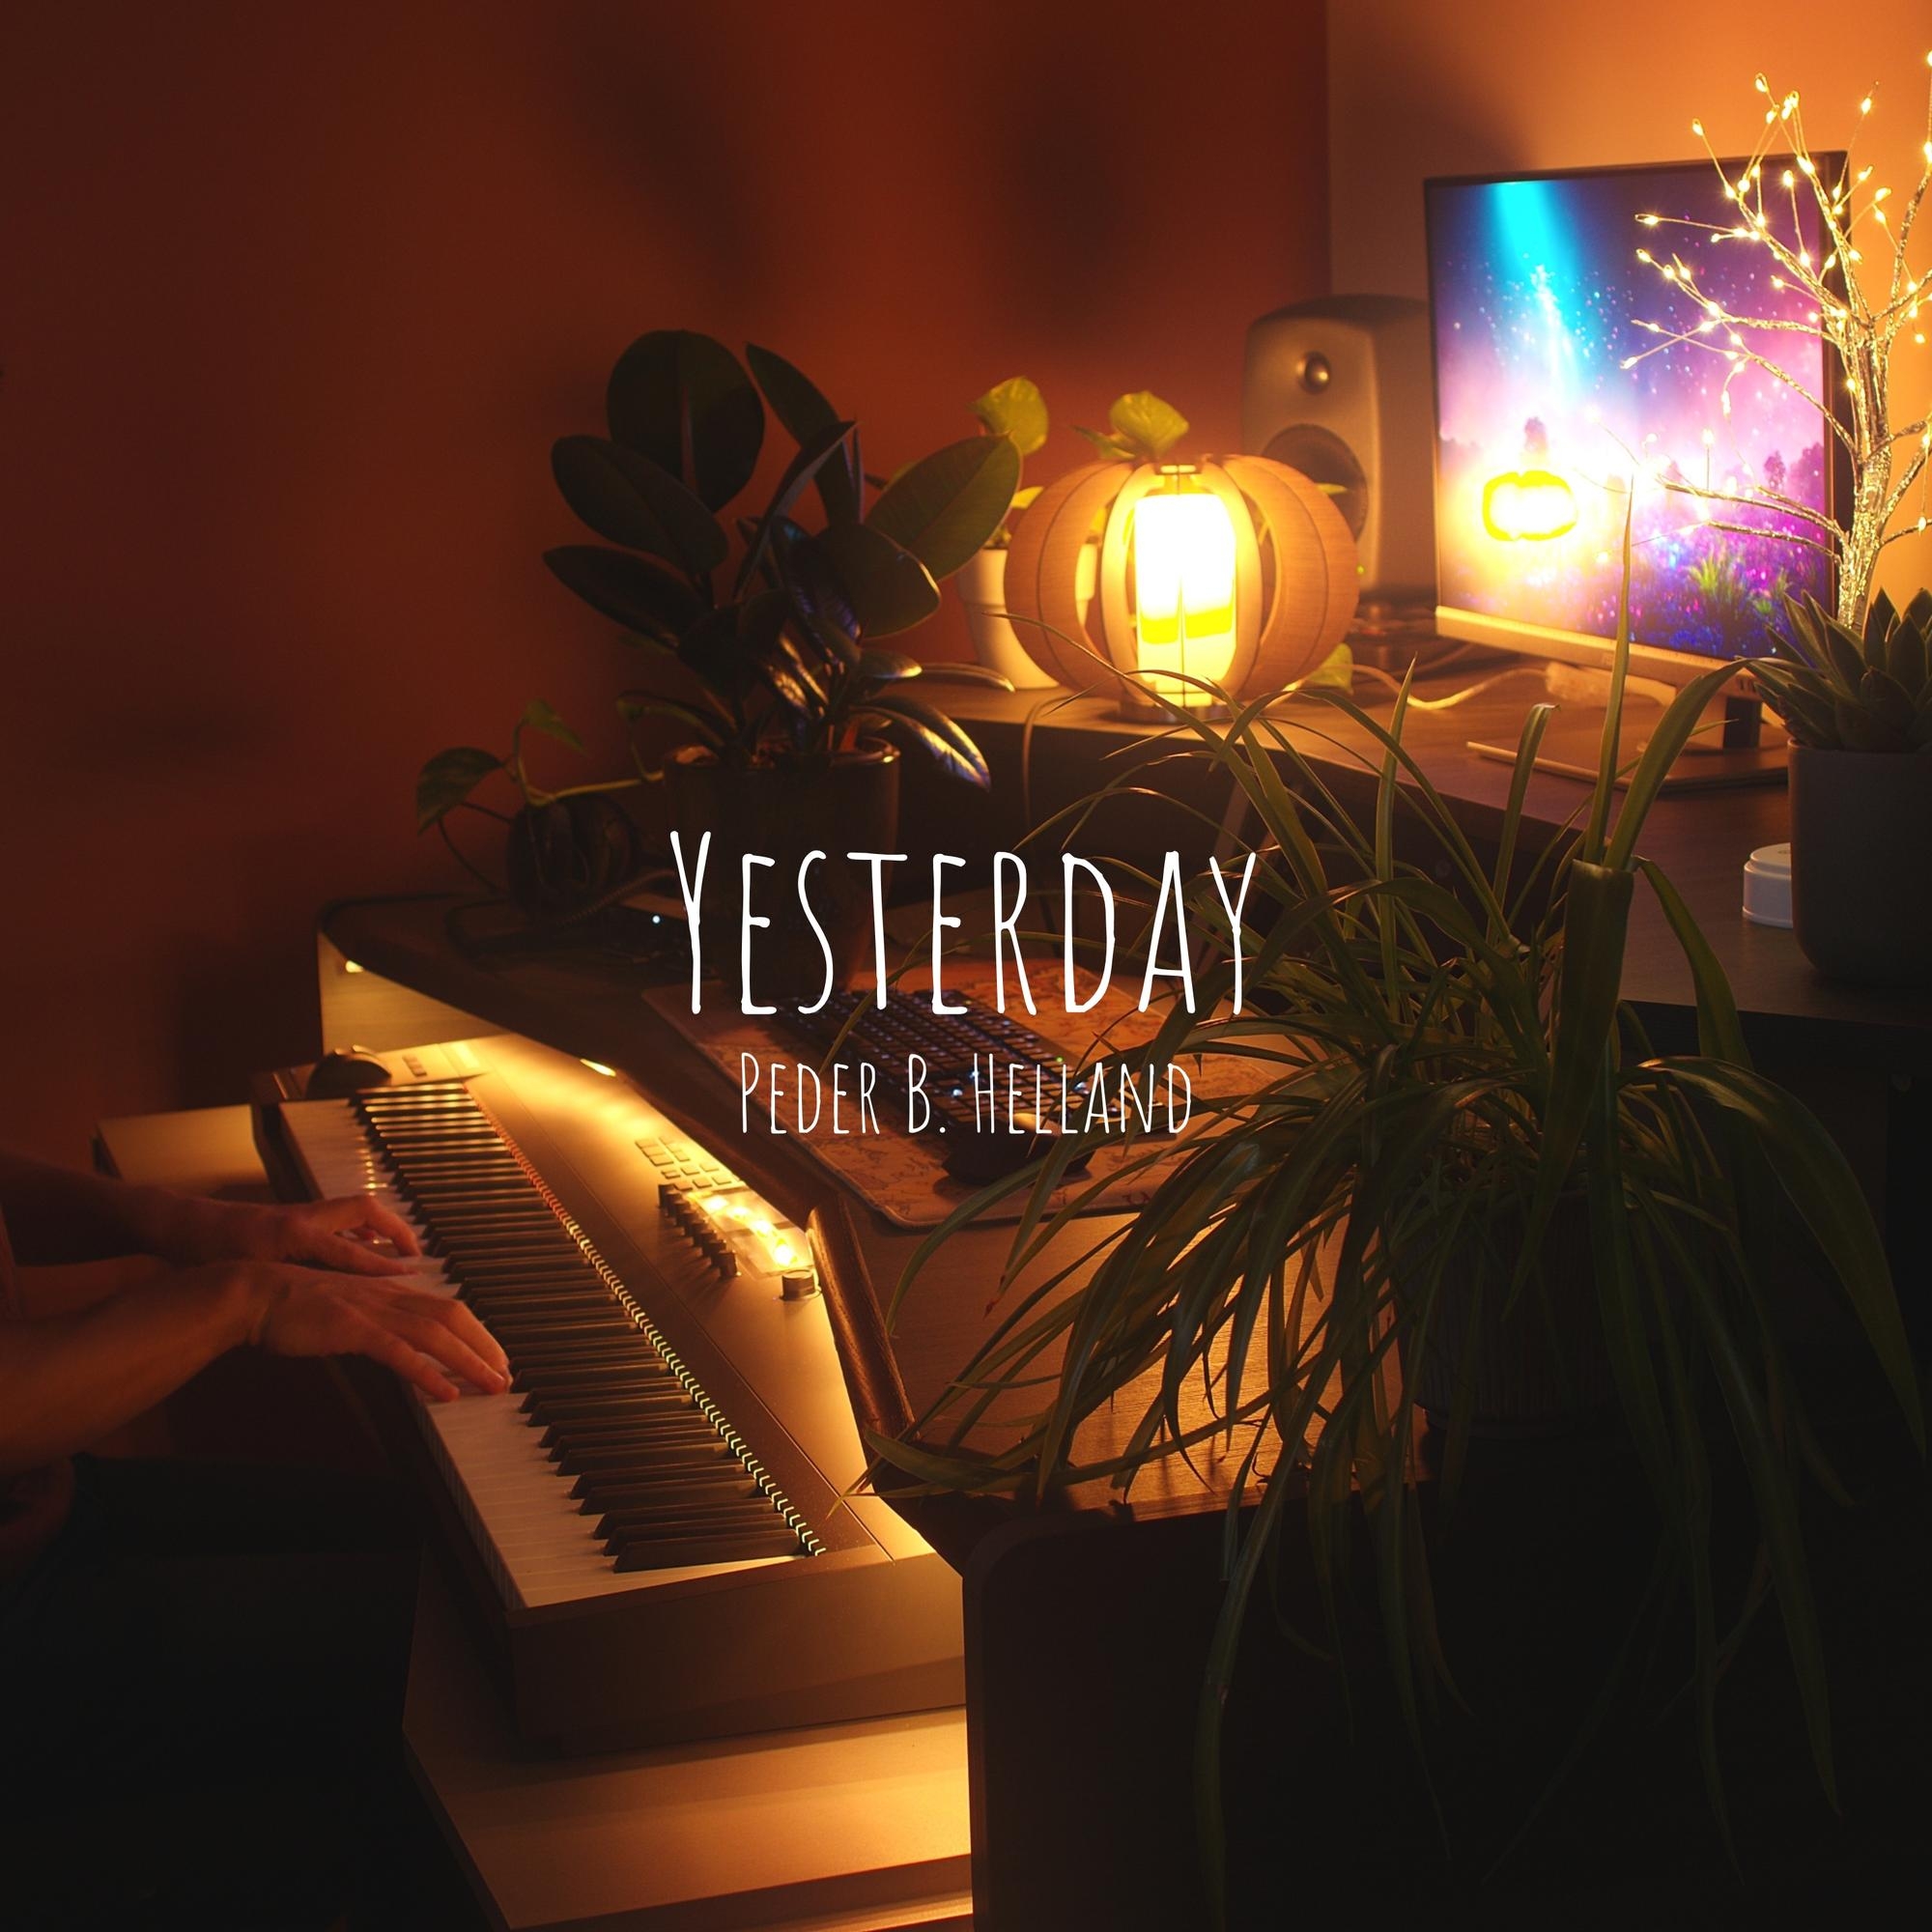 Cover art for the single Yesterday by Peder B. Helland